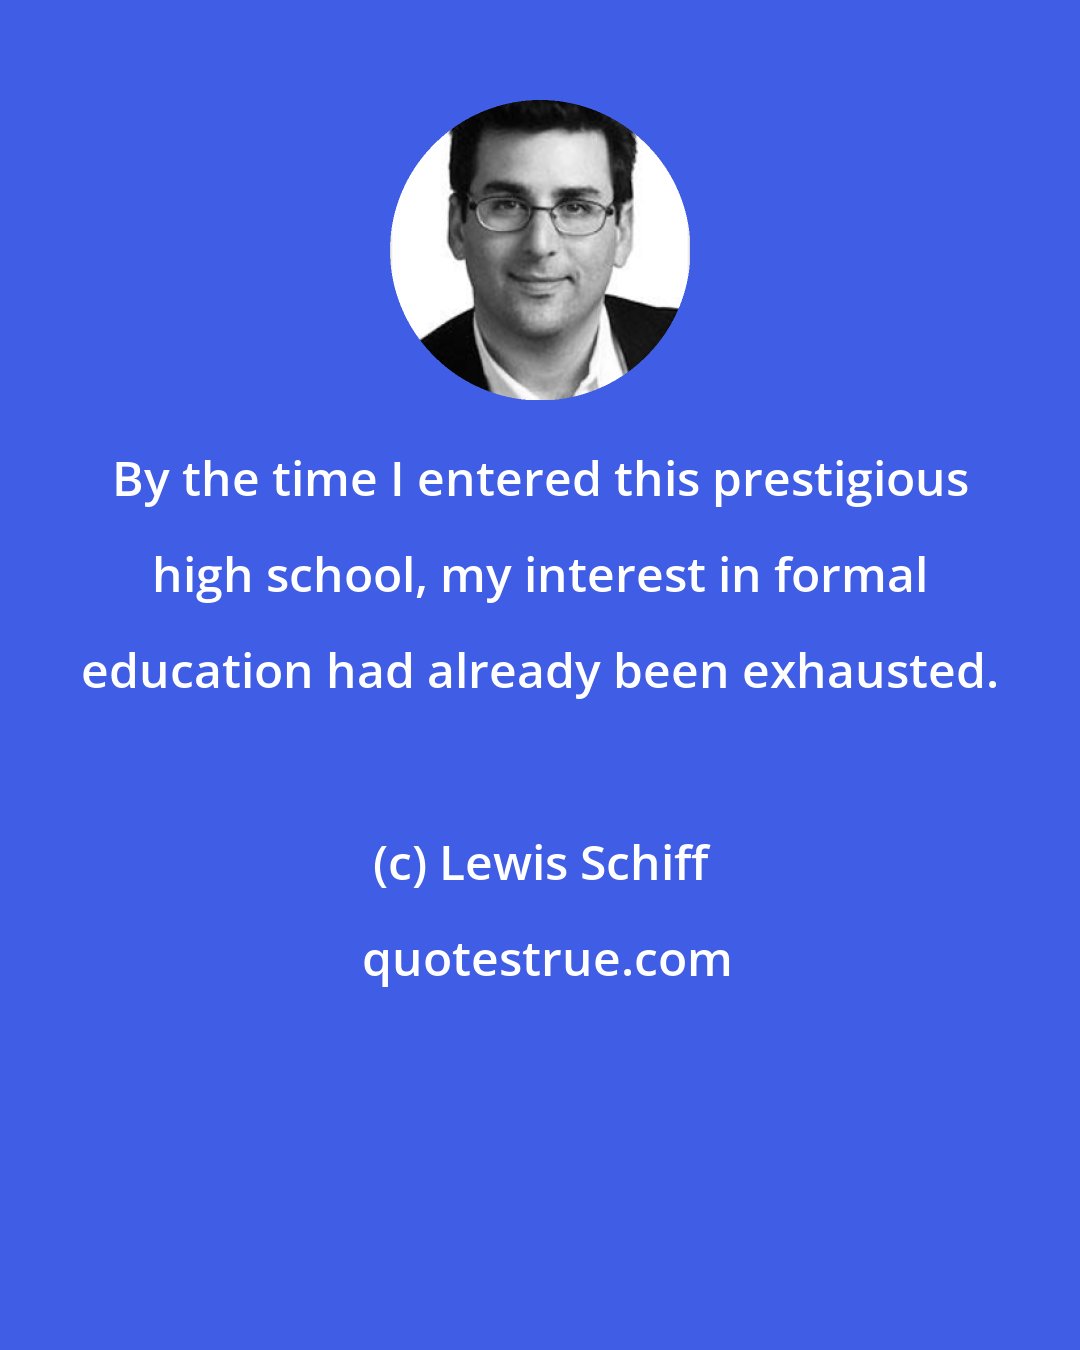 Lewis Schiff: By the time I entered this prestigious high school, my interest in formal education had already been exhausted.